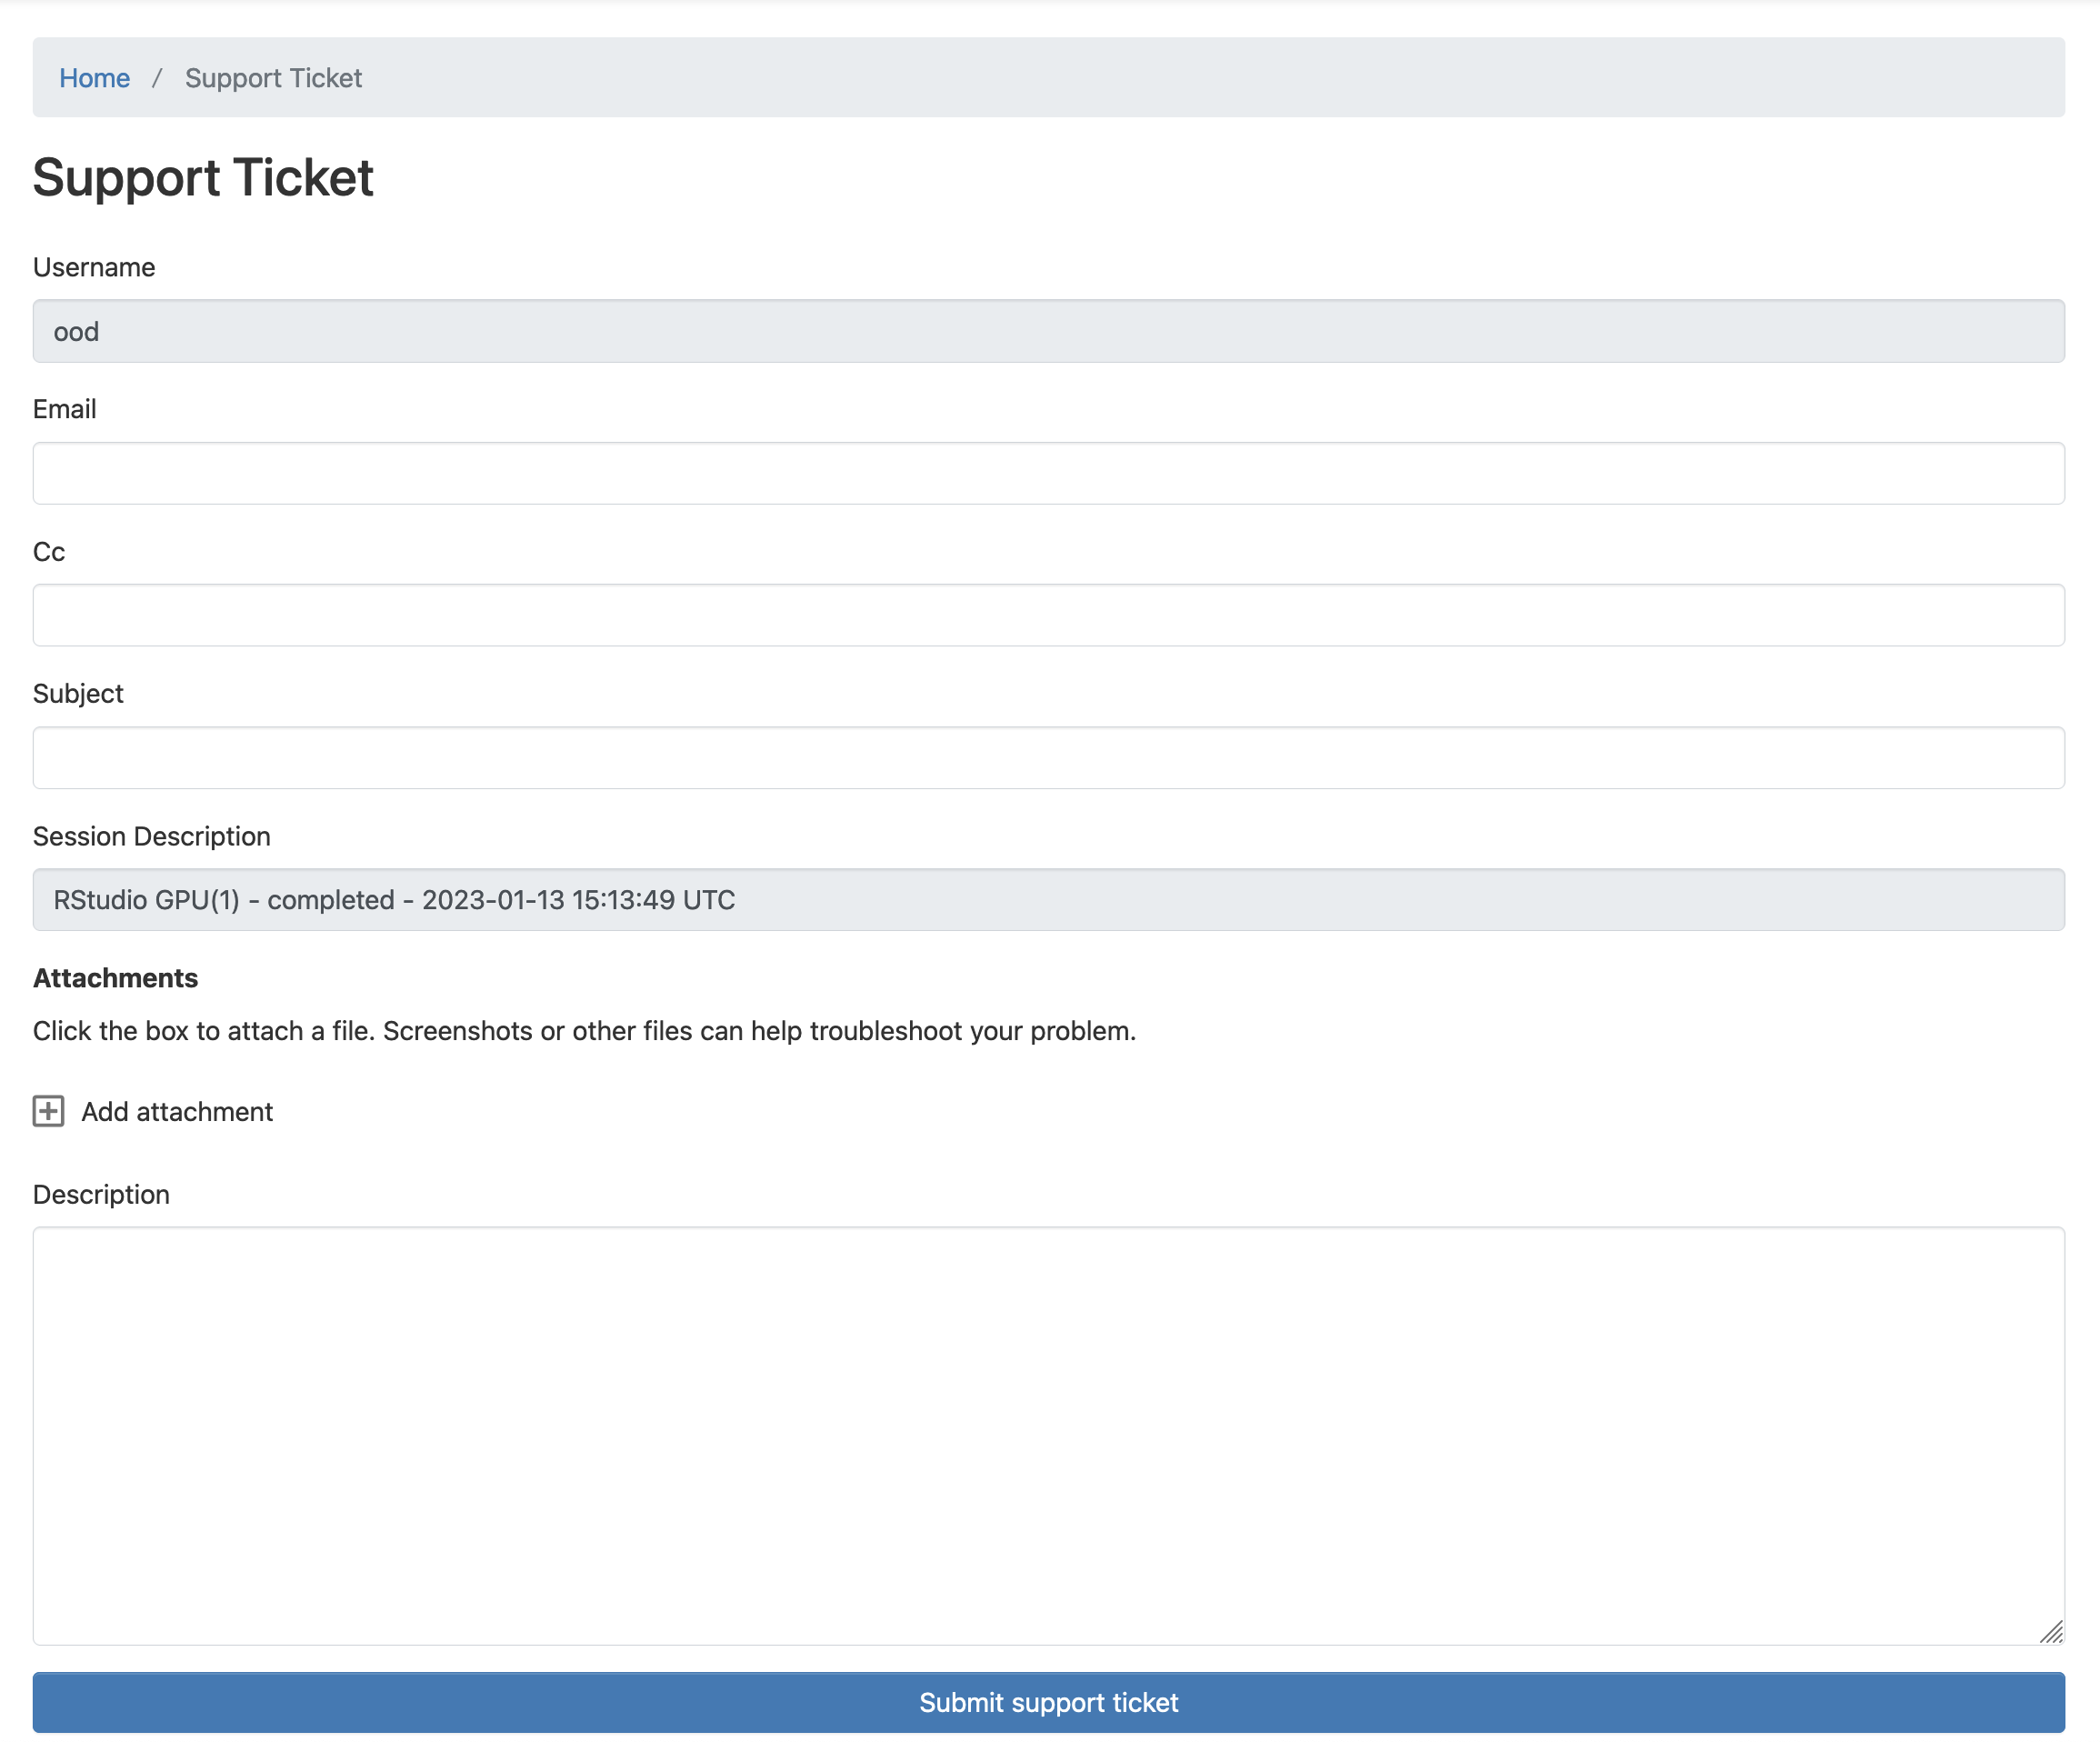 _images/support_ticket_form.png